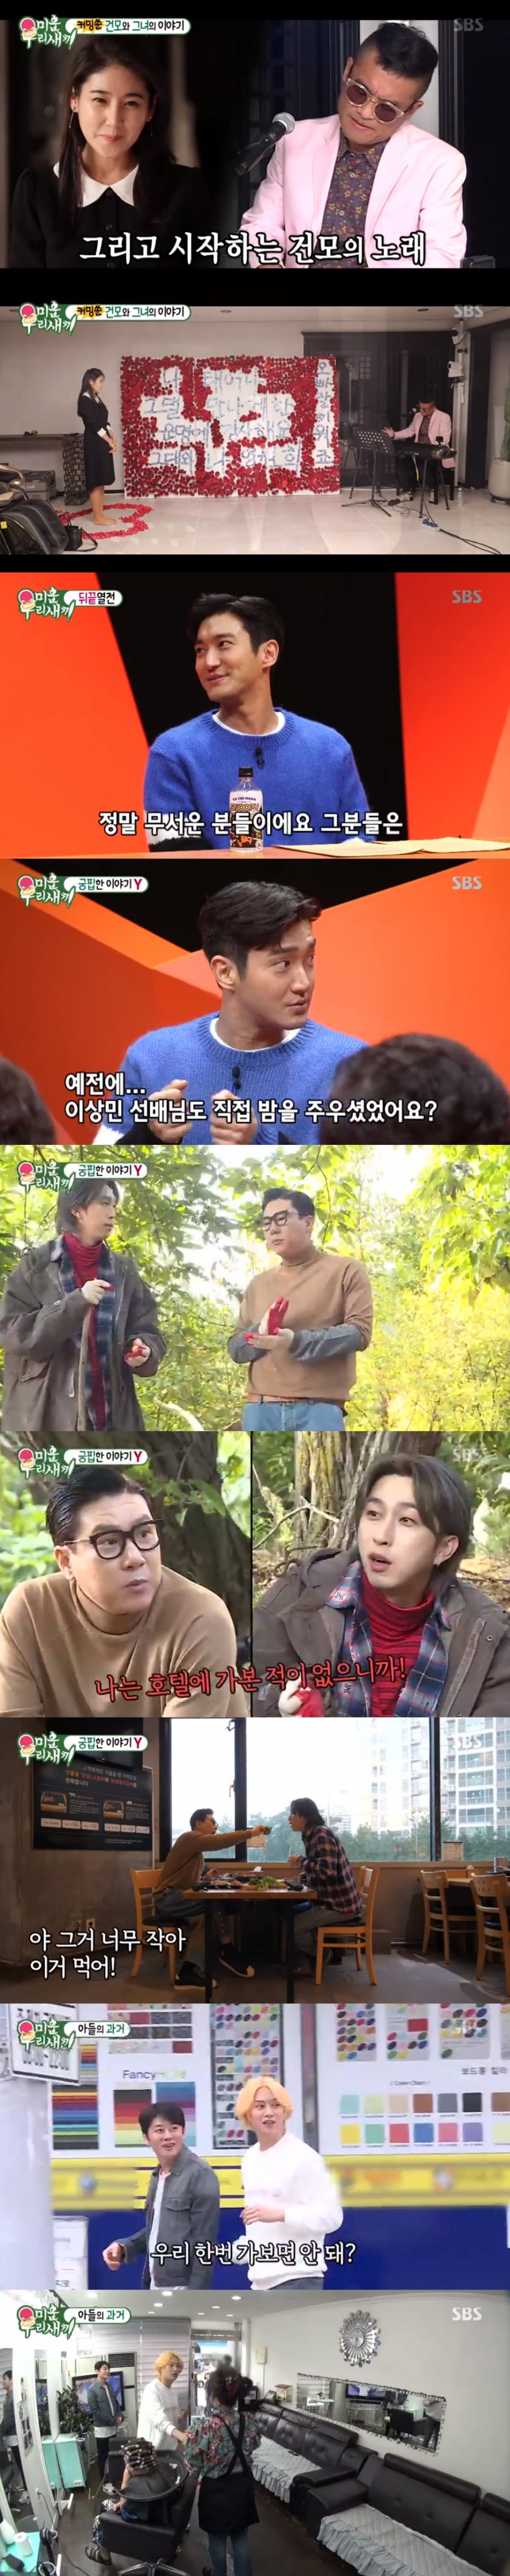 SBS My Little Old Boy Kim Gun-mos special proposal was foreseen.Guest Super Junior Choi Siwon appeared on SBS My Little Old Boy broadcast on the 24th.On this day, Choi Siwon greeted the Movengers with a welcome.In particular, the same group, Kim Hee-chul Mother, said, Its like a concert, but when I go, I will come first and greet you.However, when asked to pick up the visual director, Choi Siwon laughed in front of him saying, The visual manager is Kim Hee-chul.When asked about the most confident appearance, he replied, Personally, eyes and eyebrows.The same group member Kim Hee-chul and the episode also revealed.When I used the room together as a roommate, I had a hard time because of my sensitive personality. If I feel good because of my ups and downs, I laughed because I was afraid of the members.Shin Dong-yeop then reported on Kim Gun-mos marriage.While all celebrating, Park Soo-hong Mother was happy and bitter, saying, I was comforted by the sound of dryness.He then laughed at the appearance of Kim Gun-mo Mother, who recently appeared as a special guest.In VCR, Lee Sang-min and Sleepy went to pick up the night.Lee Sang-min also sincerely supported Sleepy, who lives to the stage and the stage as there was a time when life was difficult.Sleepy confessed to his sad life honestly and said, I can not go to many places because I think I will look at me poorly.Lee Sang-min went to Sleepy and Wuhan Refill Meat Buffet, where he could not eat properly, and handed over a variety of tips to eat a lot, saying, Eat as much as you like today.It also encouraged Sleepy, who was confident and timid.Kim Hee-chul was soaked in memories by walking around his friend and hometown of Wonju, Gangwon Province, especially when he was glad to see his photo still attached to his hair salon.I visited the meat shop that I worked part-time after the beauty salon and had a good time.On the other hand, Kim Gun-mo was expected to prepare a piano event for the bride-to-be Jang Ji Youn.